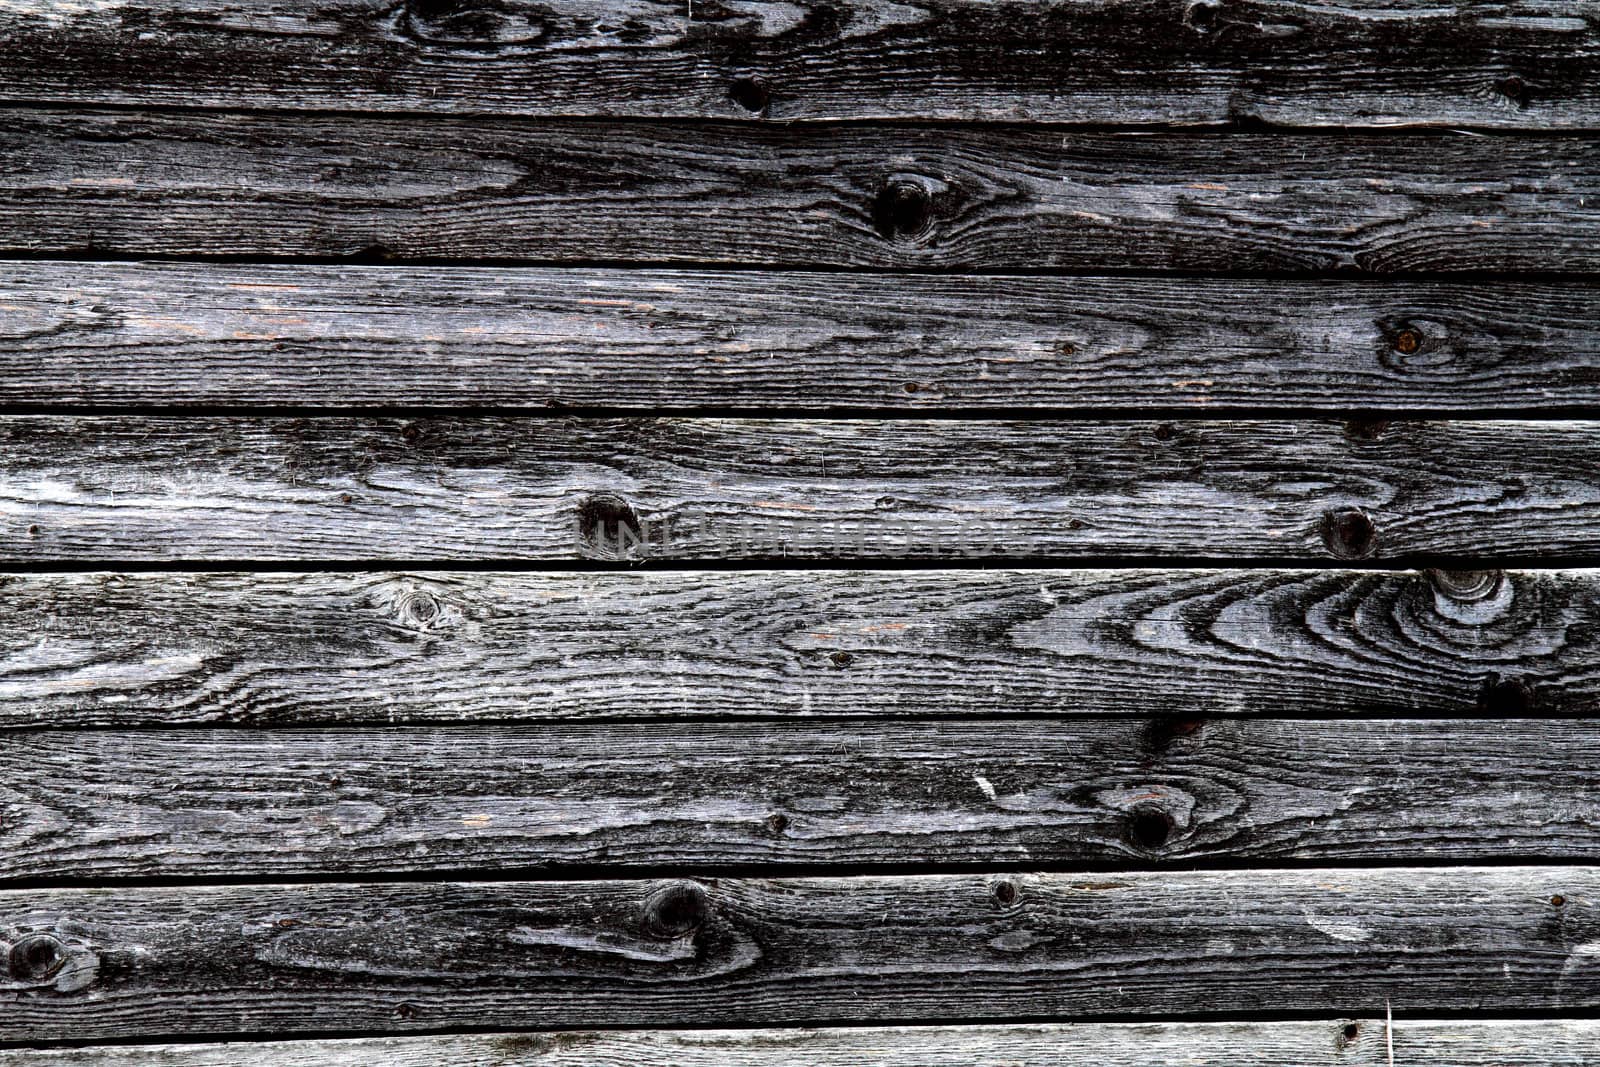 old wooden background as nice natural texture 